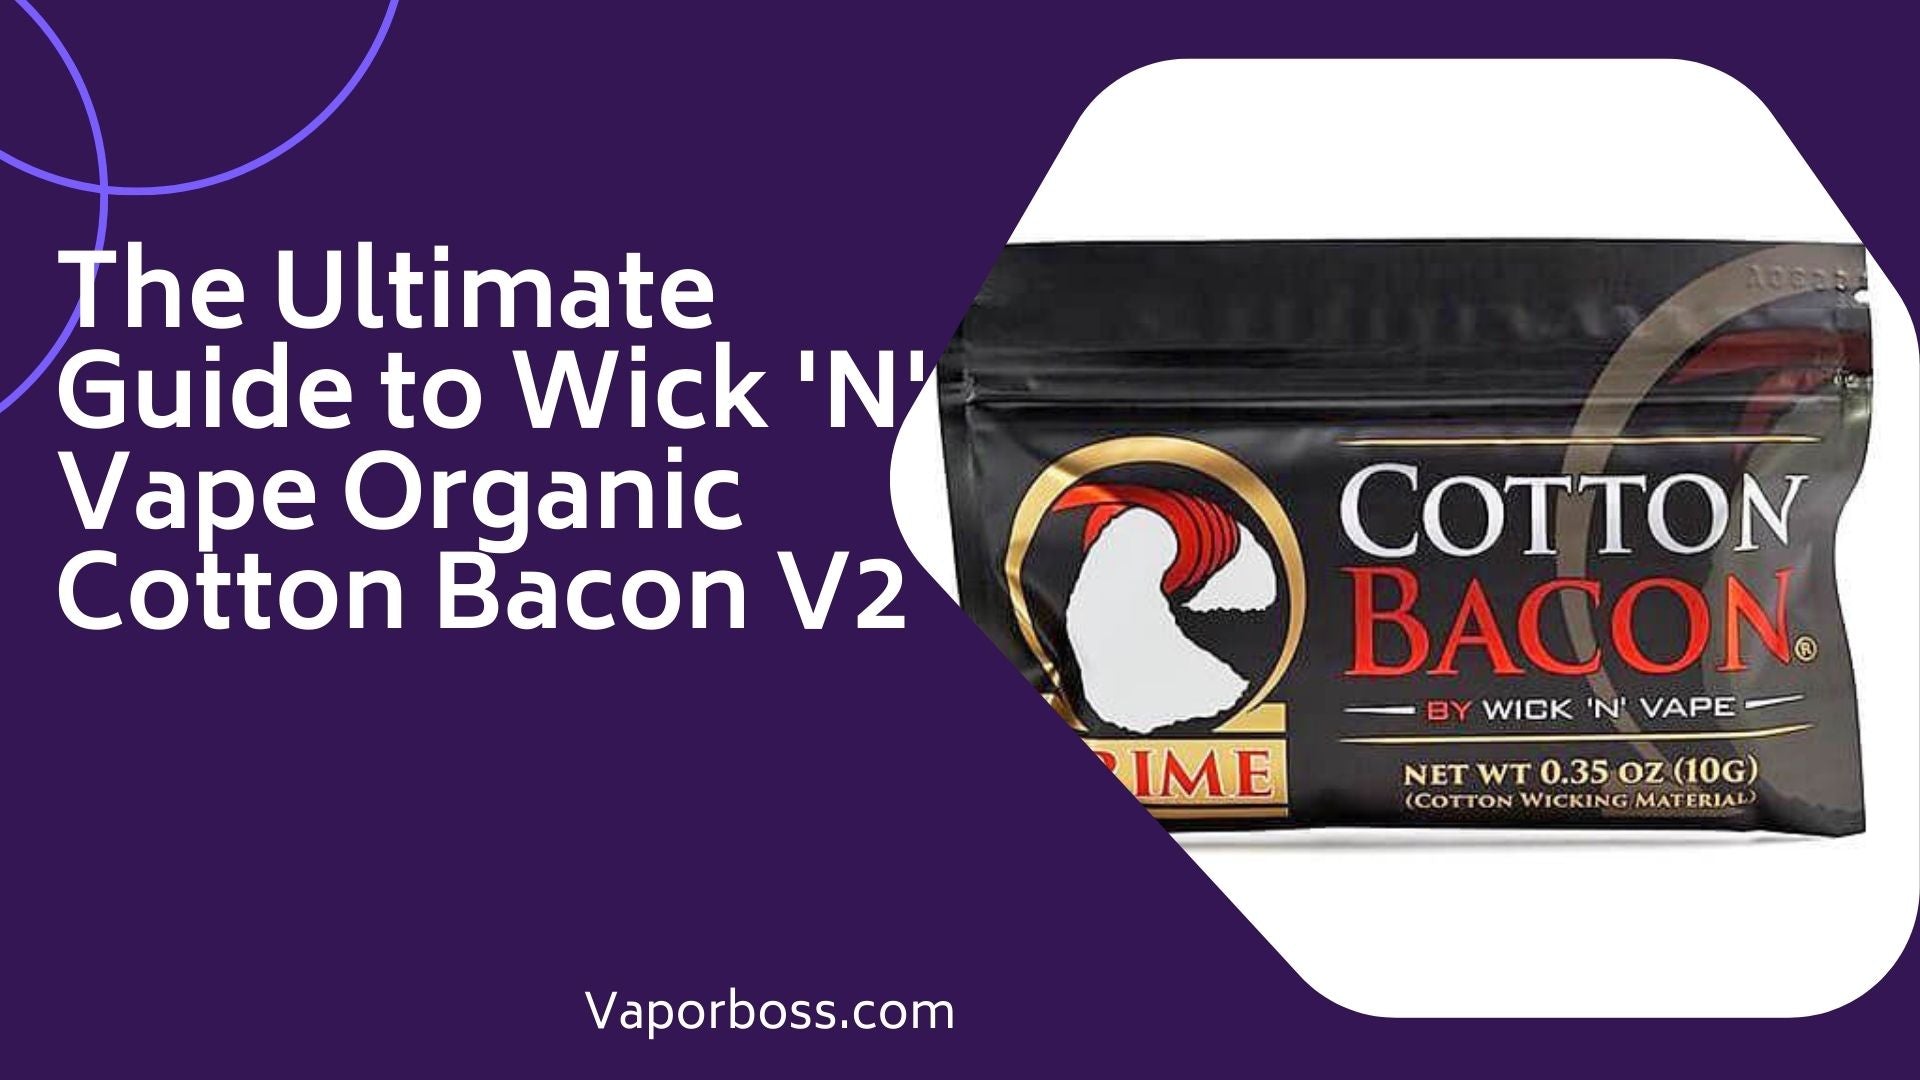 The Ultimate Guide to Wick 'N' Vape Organic Cotton Bacon V2